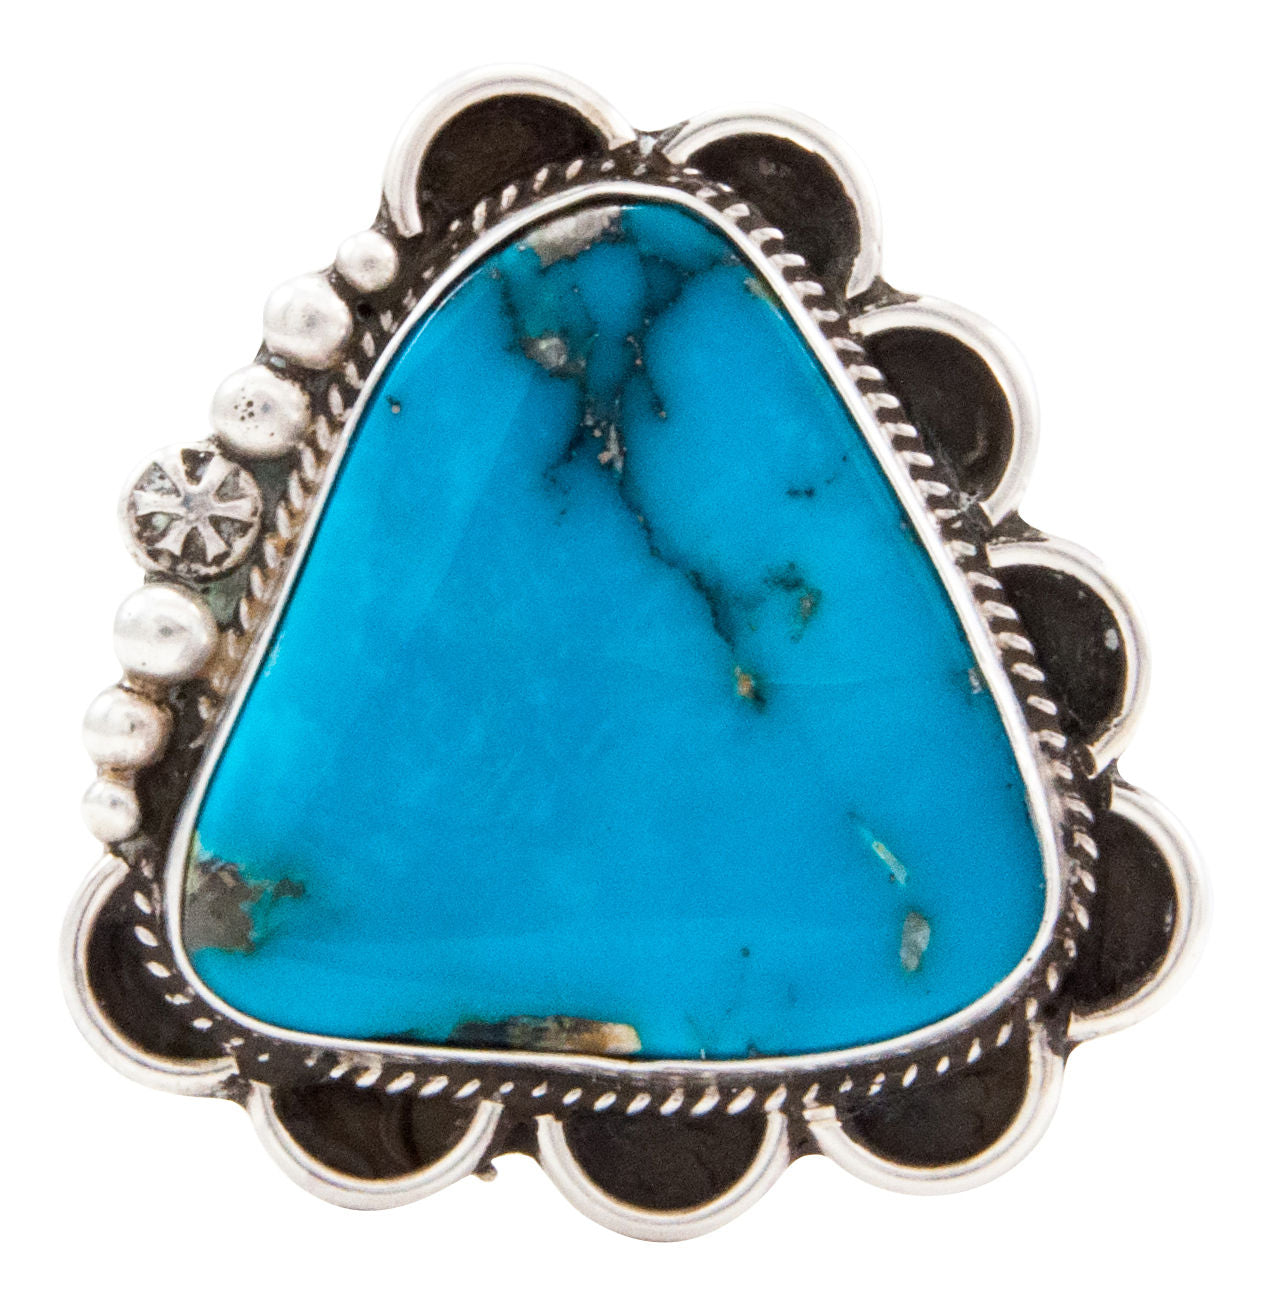 Navajo Native American Blue Gem Turquoise Ring Size 8 1/4 Guerro